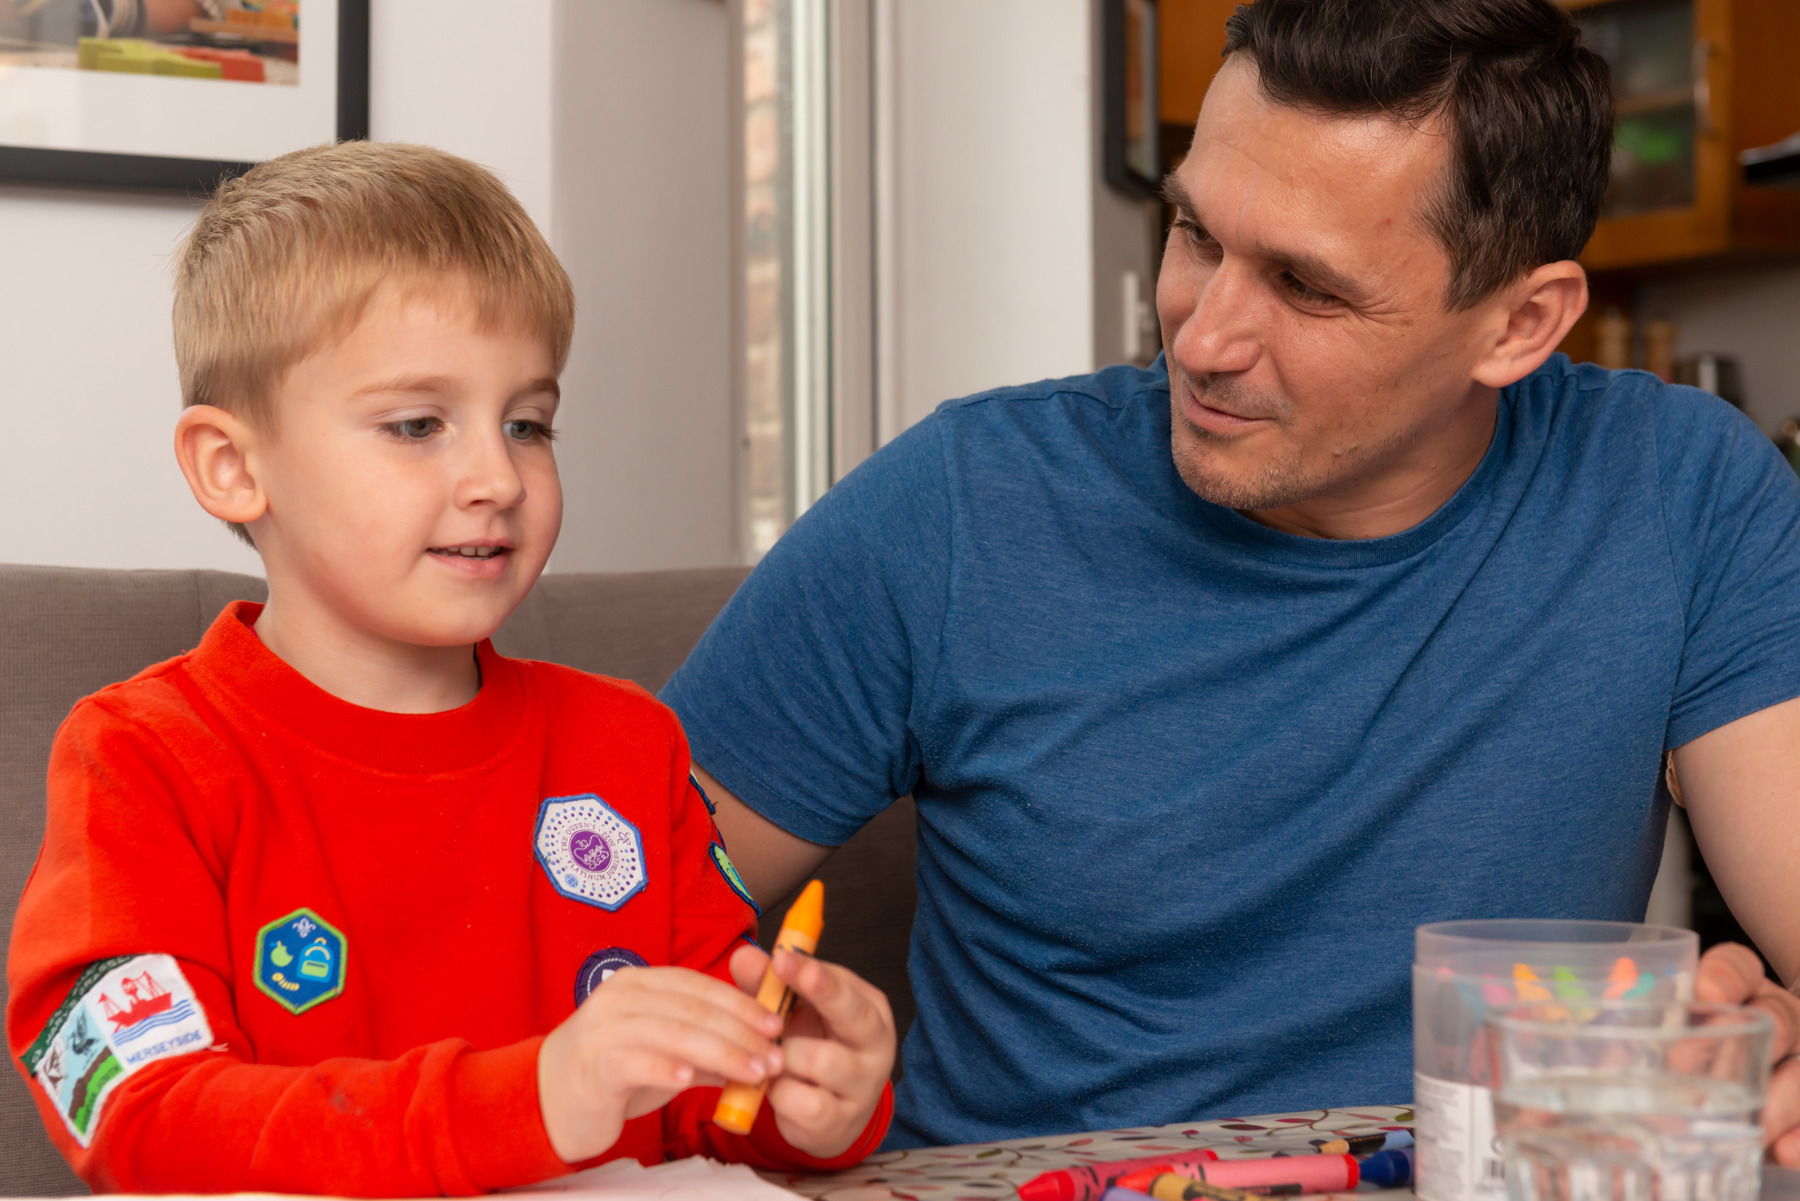 Oscar is holding an orange crayon and wearing his Squirrel jumper and looking at a box of crayons. He's sitting next to his dad who's looking at him, wearing a blue t-shirt.